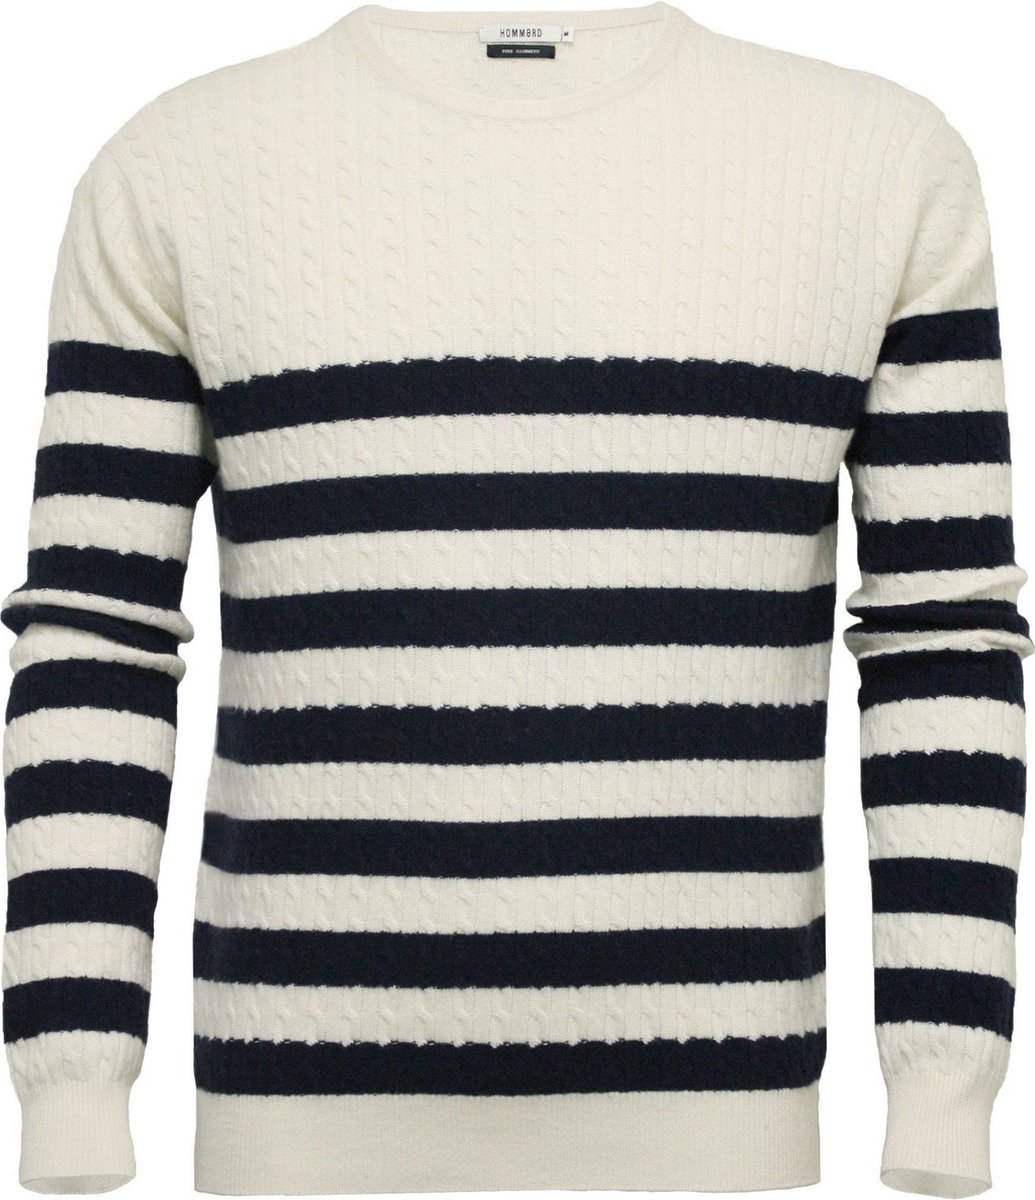 Hommard Crew Neck Cable Striped Silk Cashmere Sweater maat XX-Large